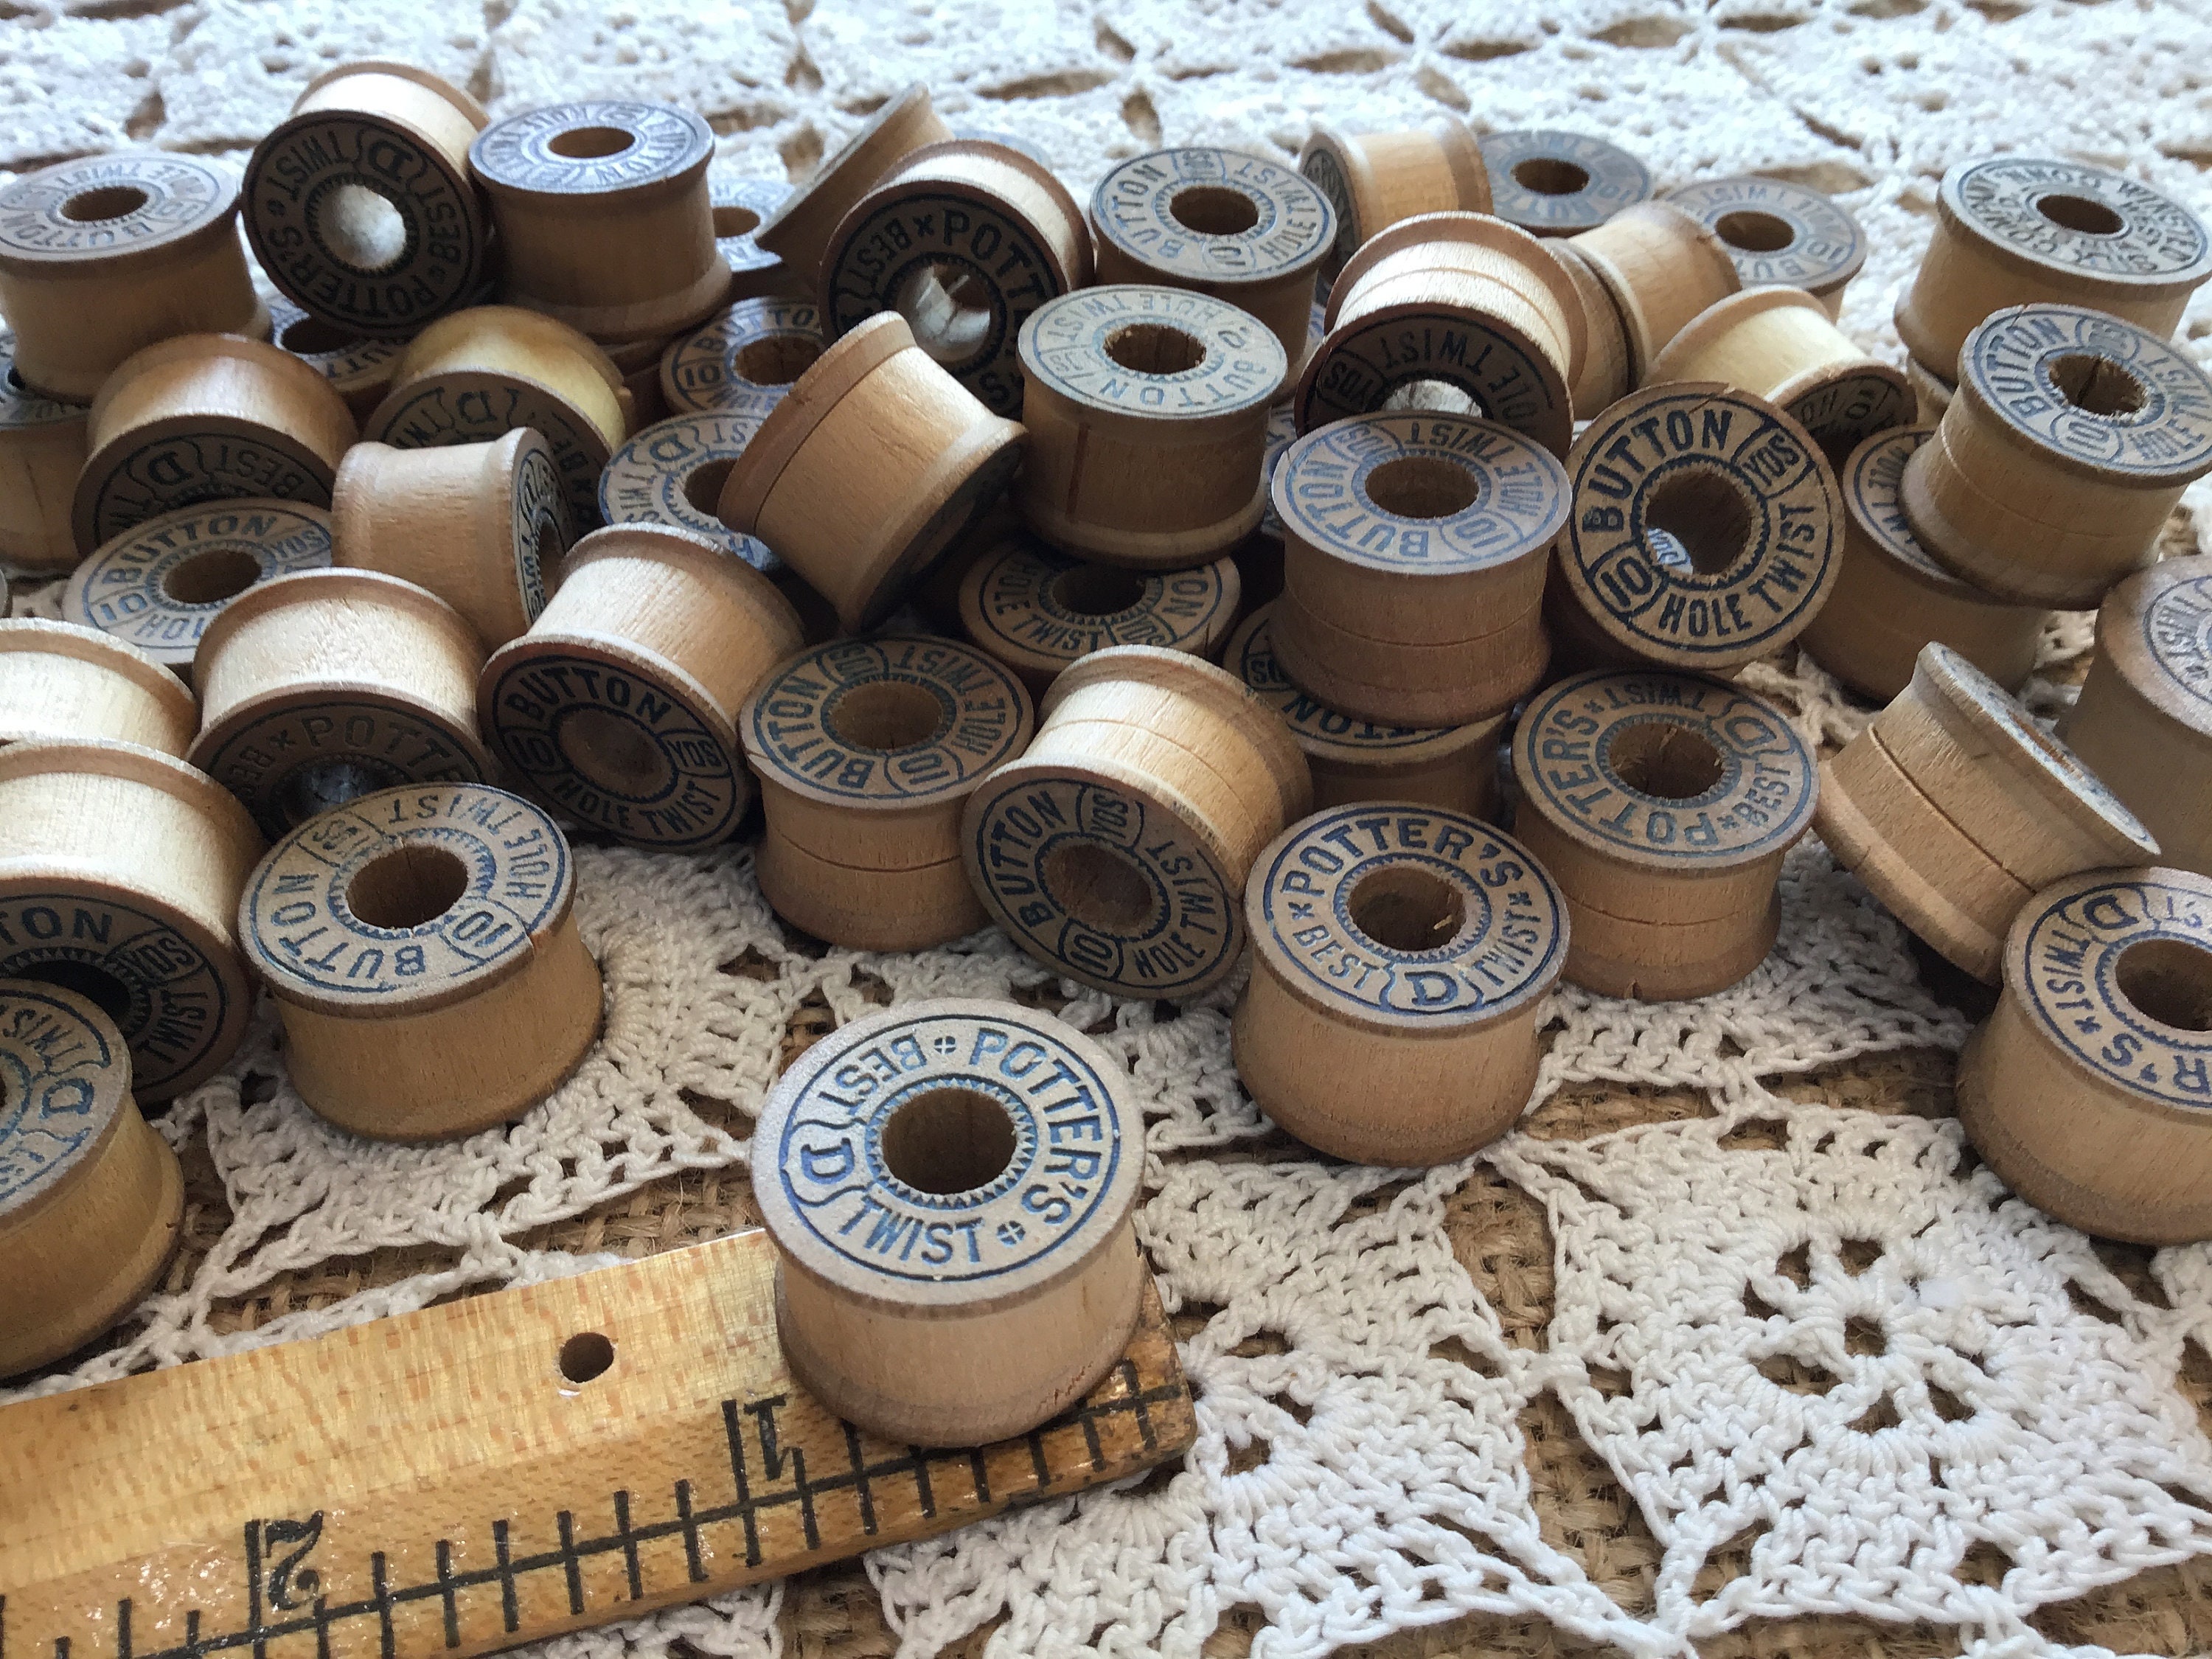 Heirloom Collection – wooden spools of thread